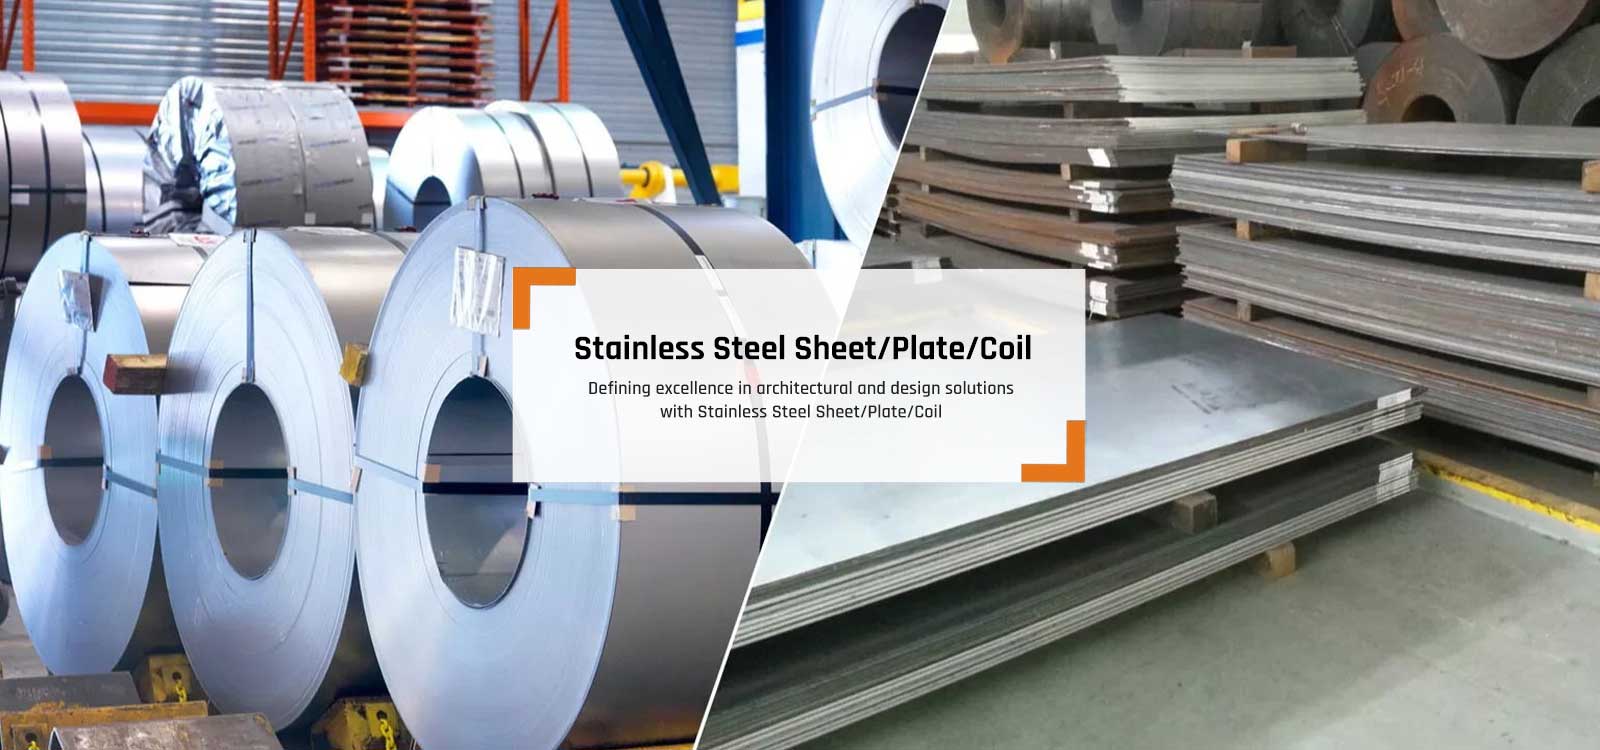 Stainless Steel Sheet Plates Coils Manufacturers in Panaji